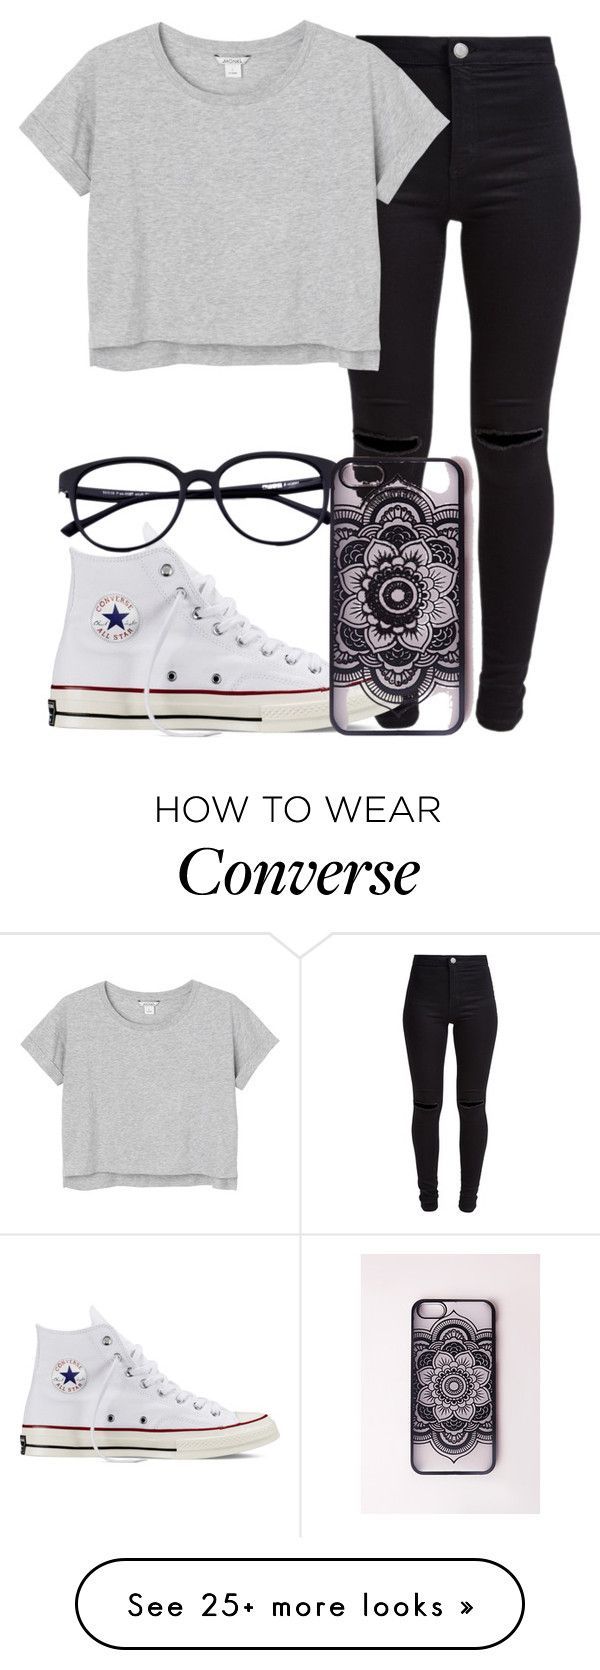 “Mandala 4” by mallorimae on Polyvore featuring New Look, Monki, Converse and Missguided